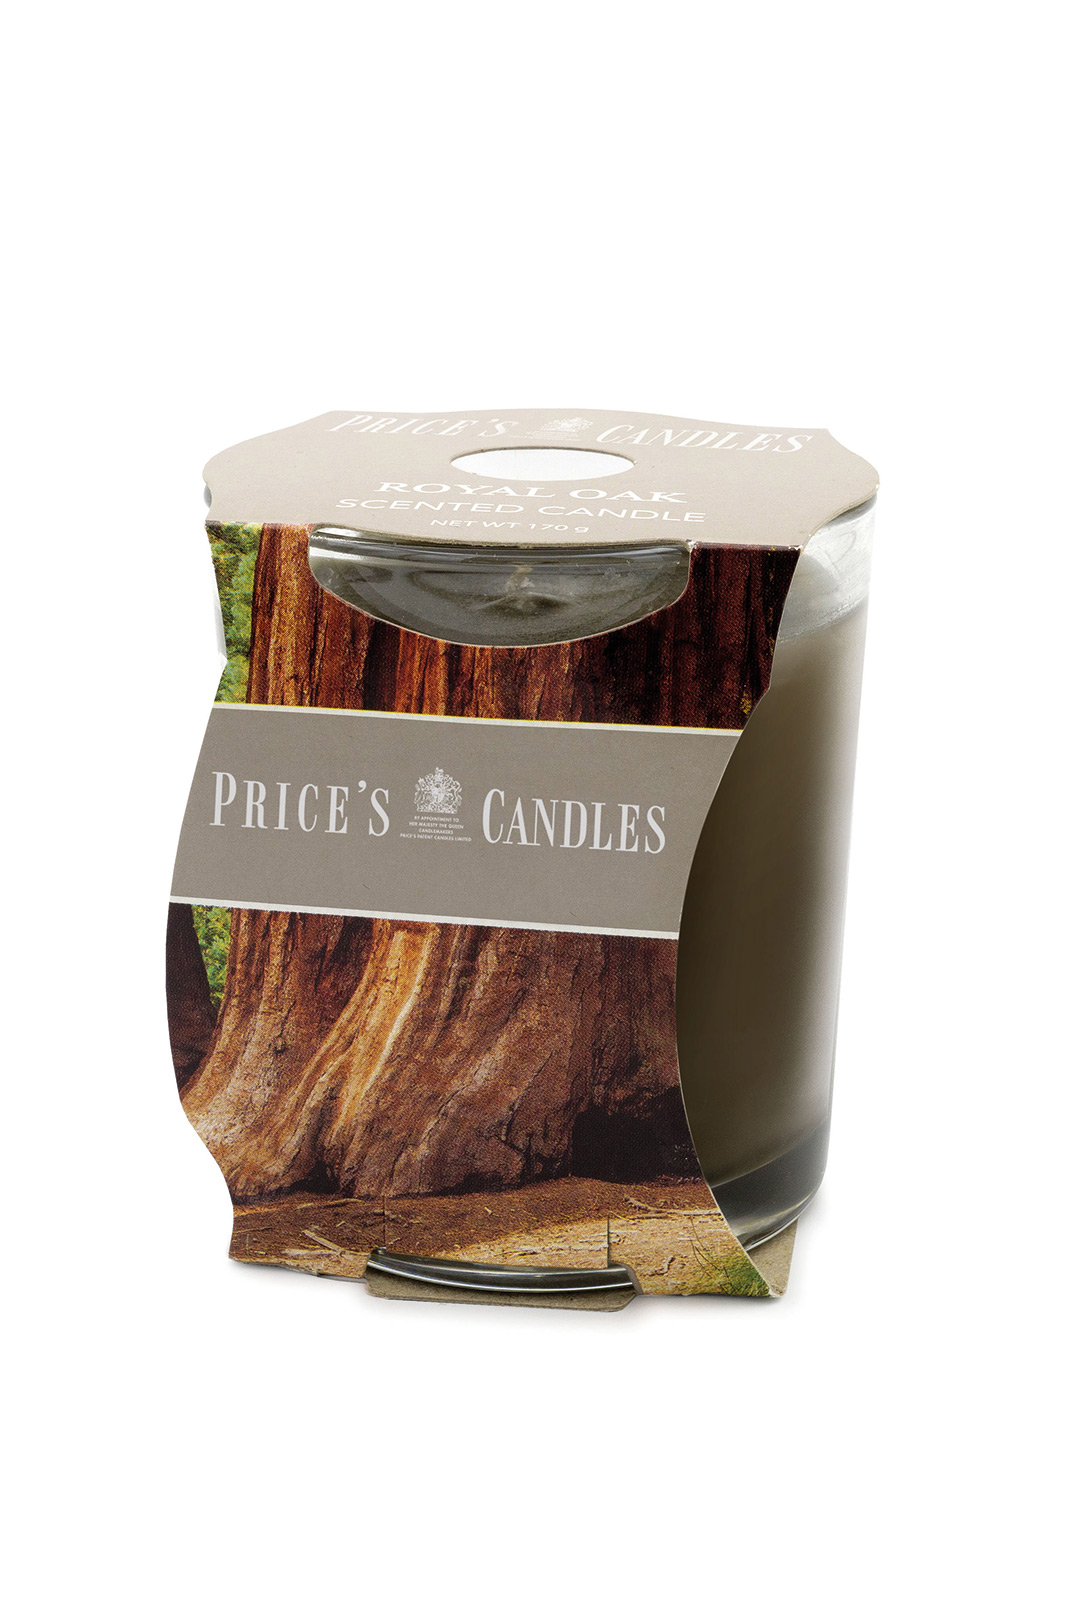 Prices Candle "Royal Oak" 170g     